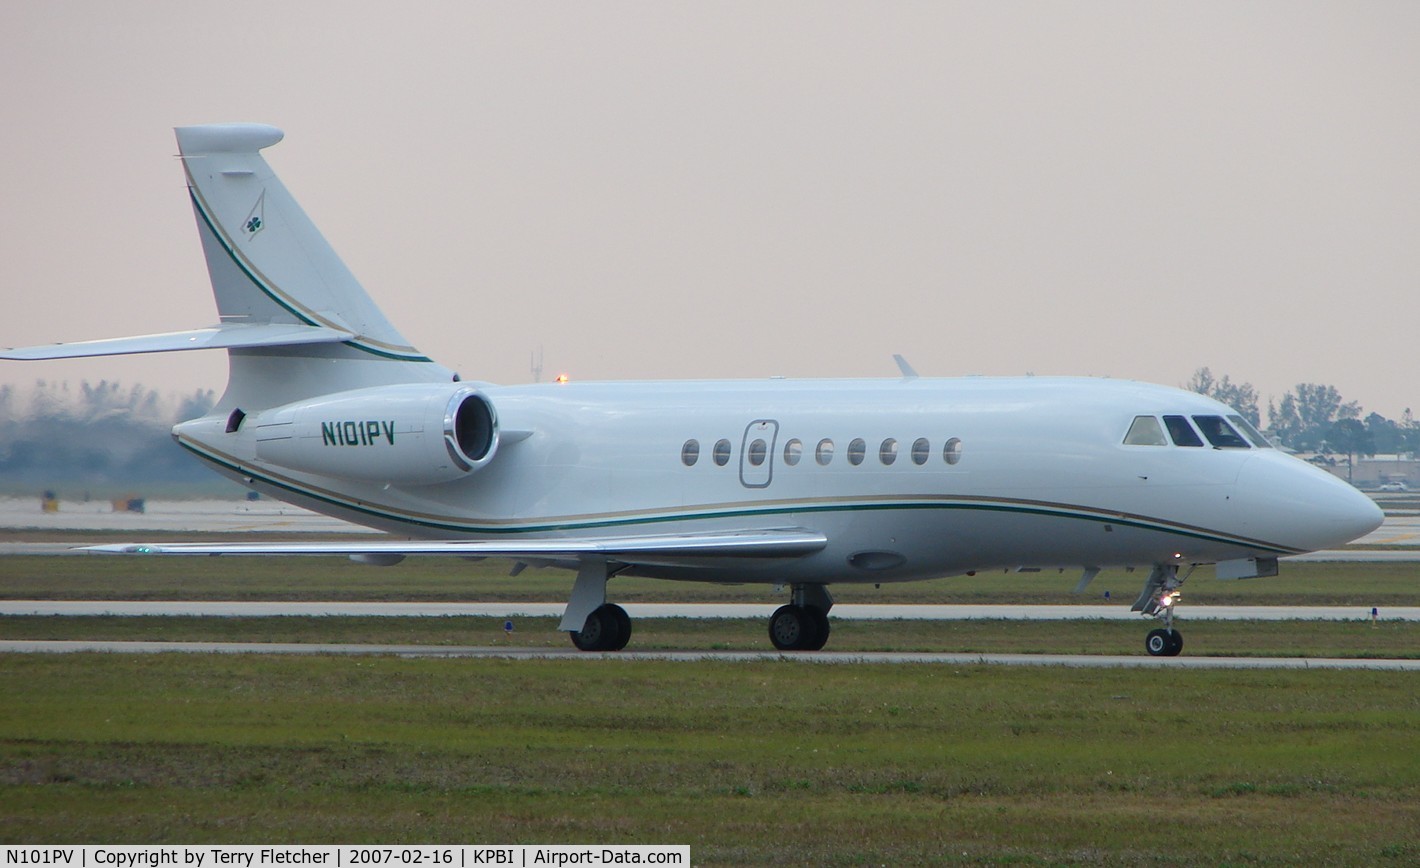 N101PV, 2003 Dassault FALCON 2000EX C/N 23, part of the Friday afternoon arrivals 'rush' at PBI